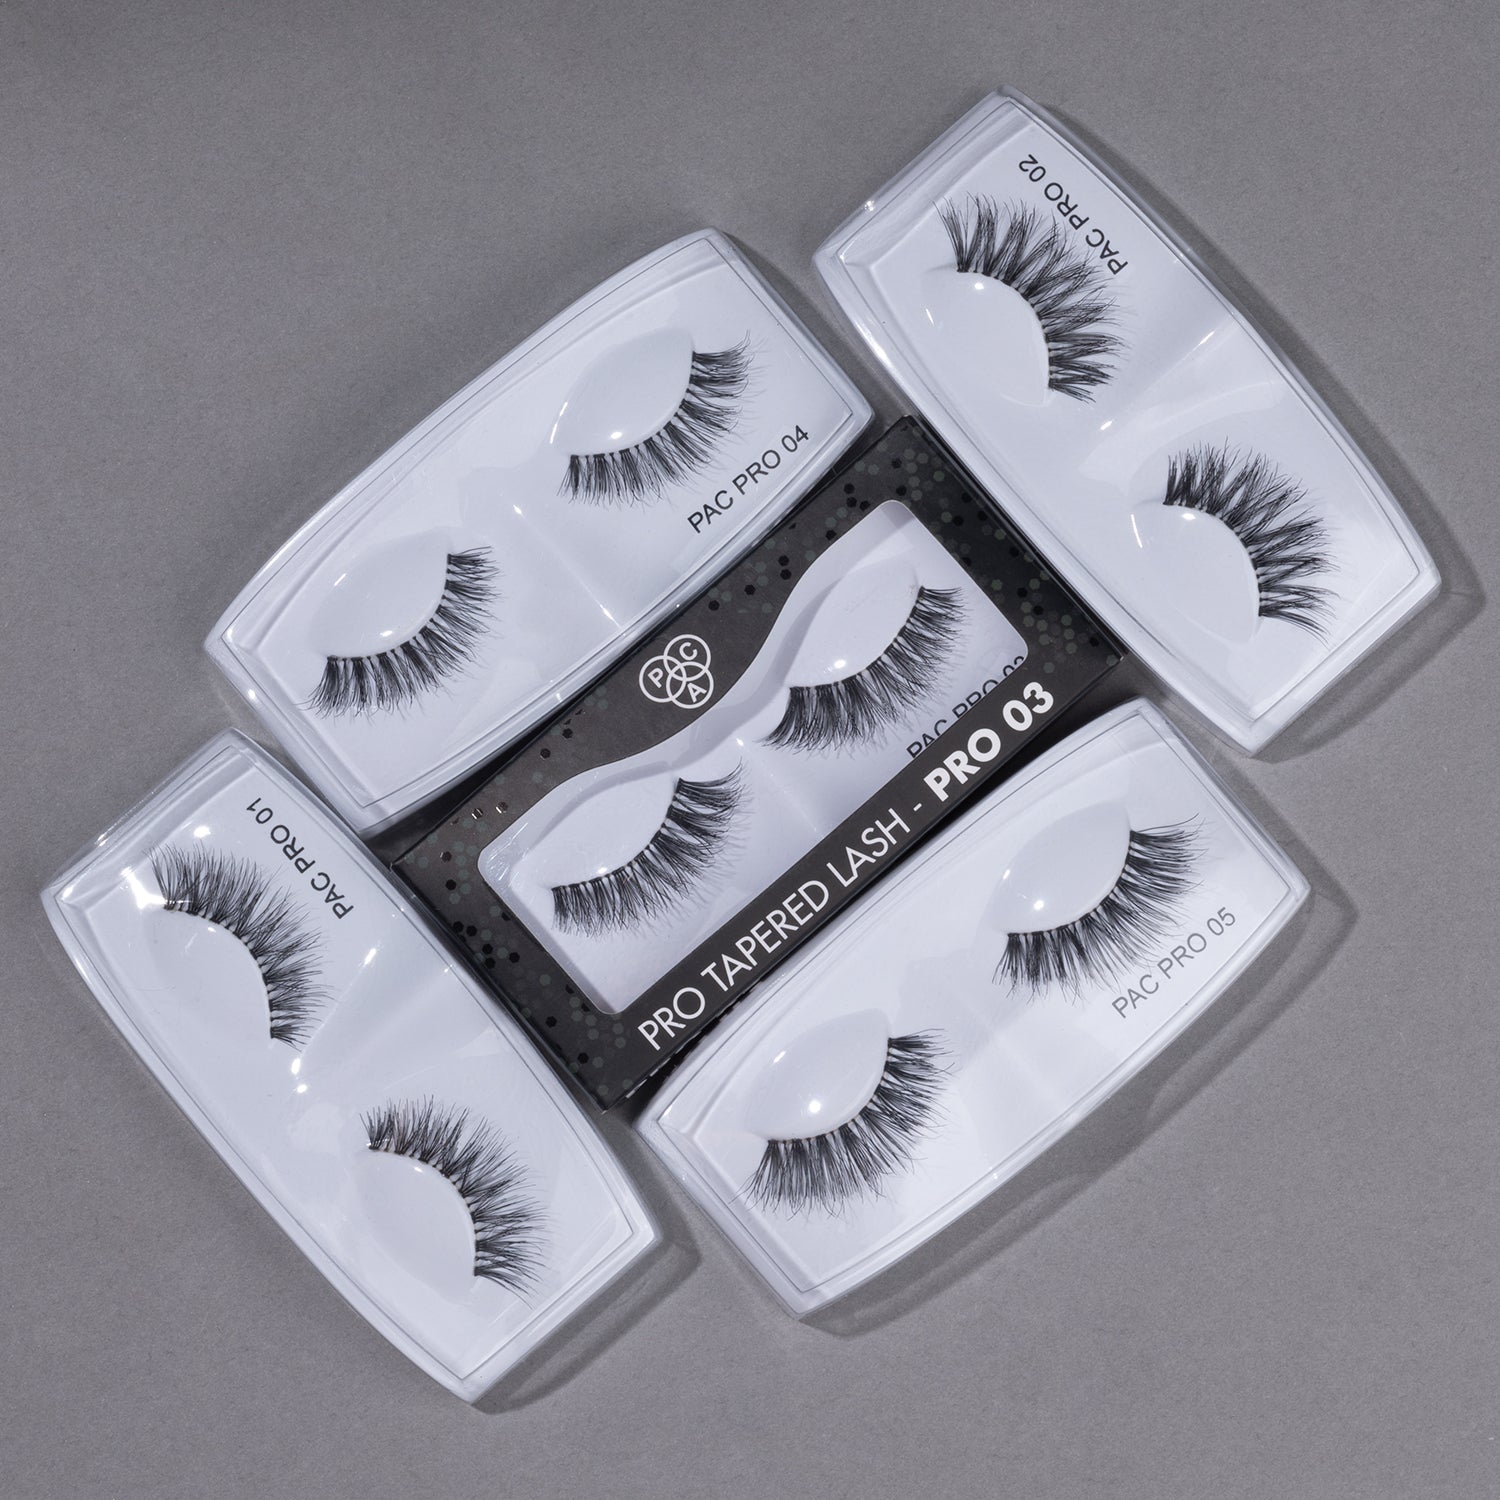 PAC Cosmetics PRO Tapered Lash (1 Pair) #Color_PRO01